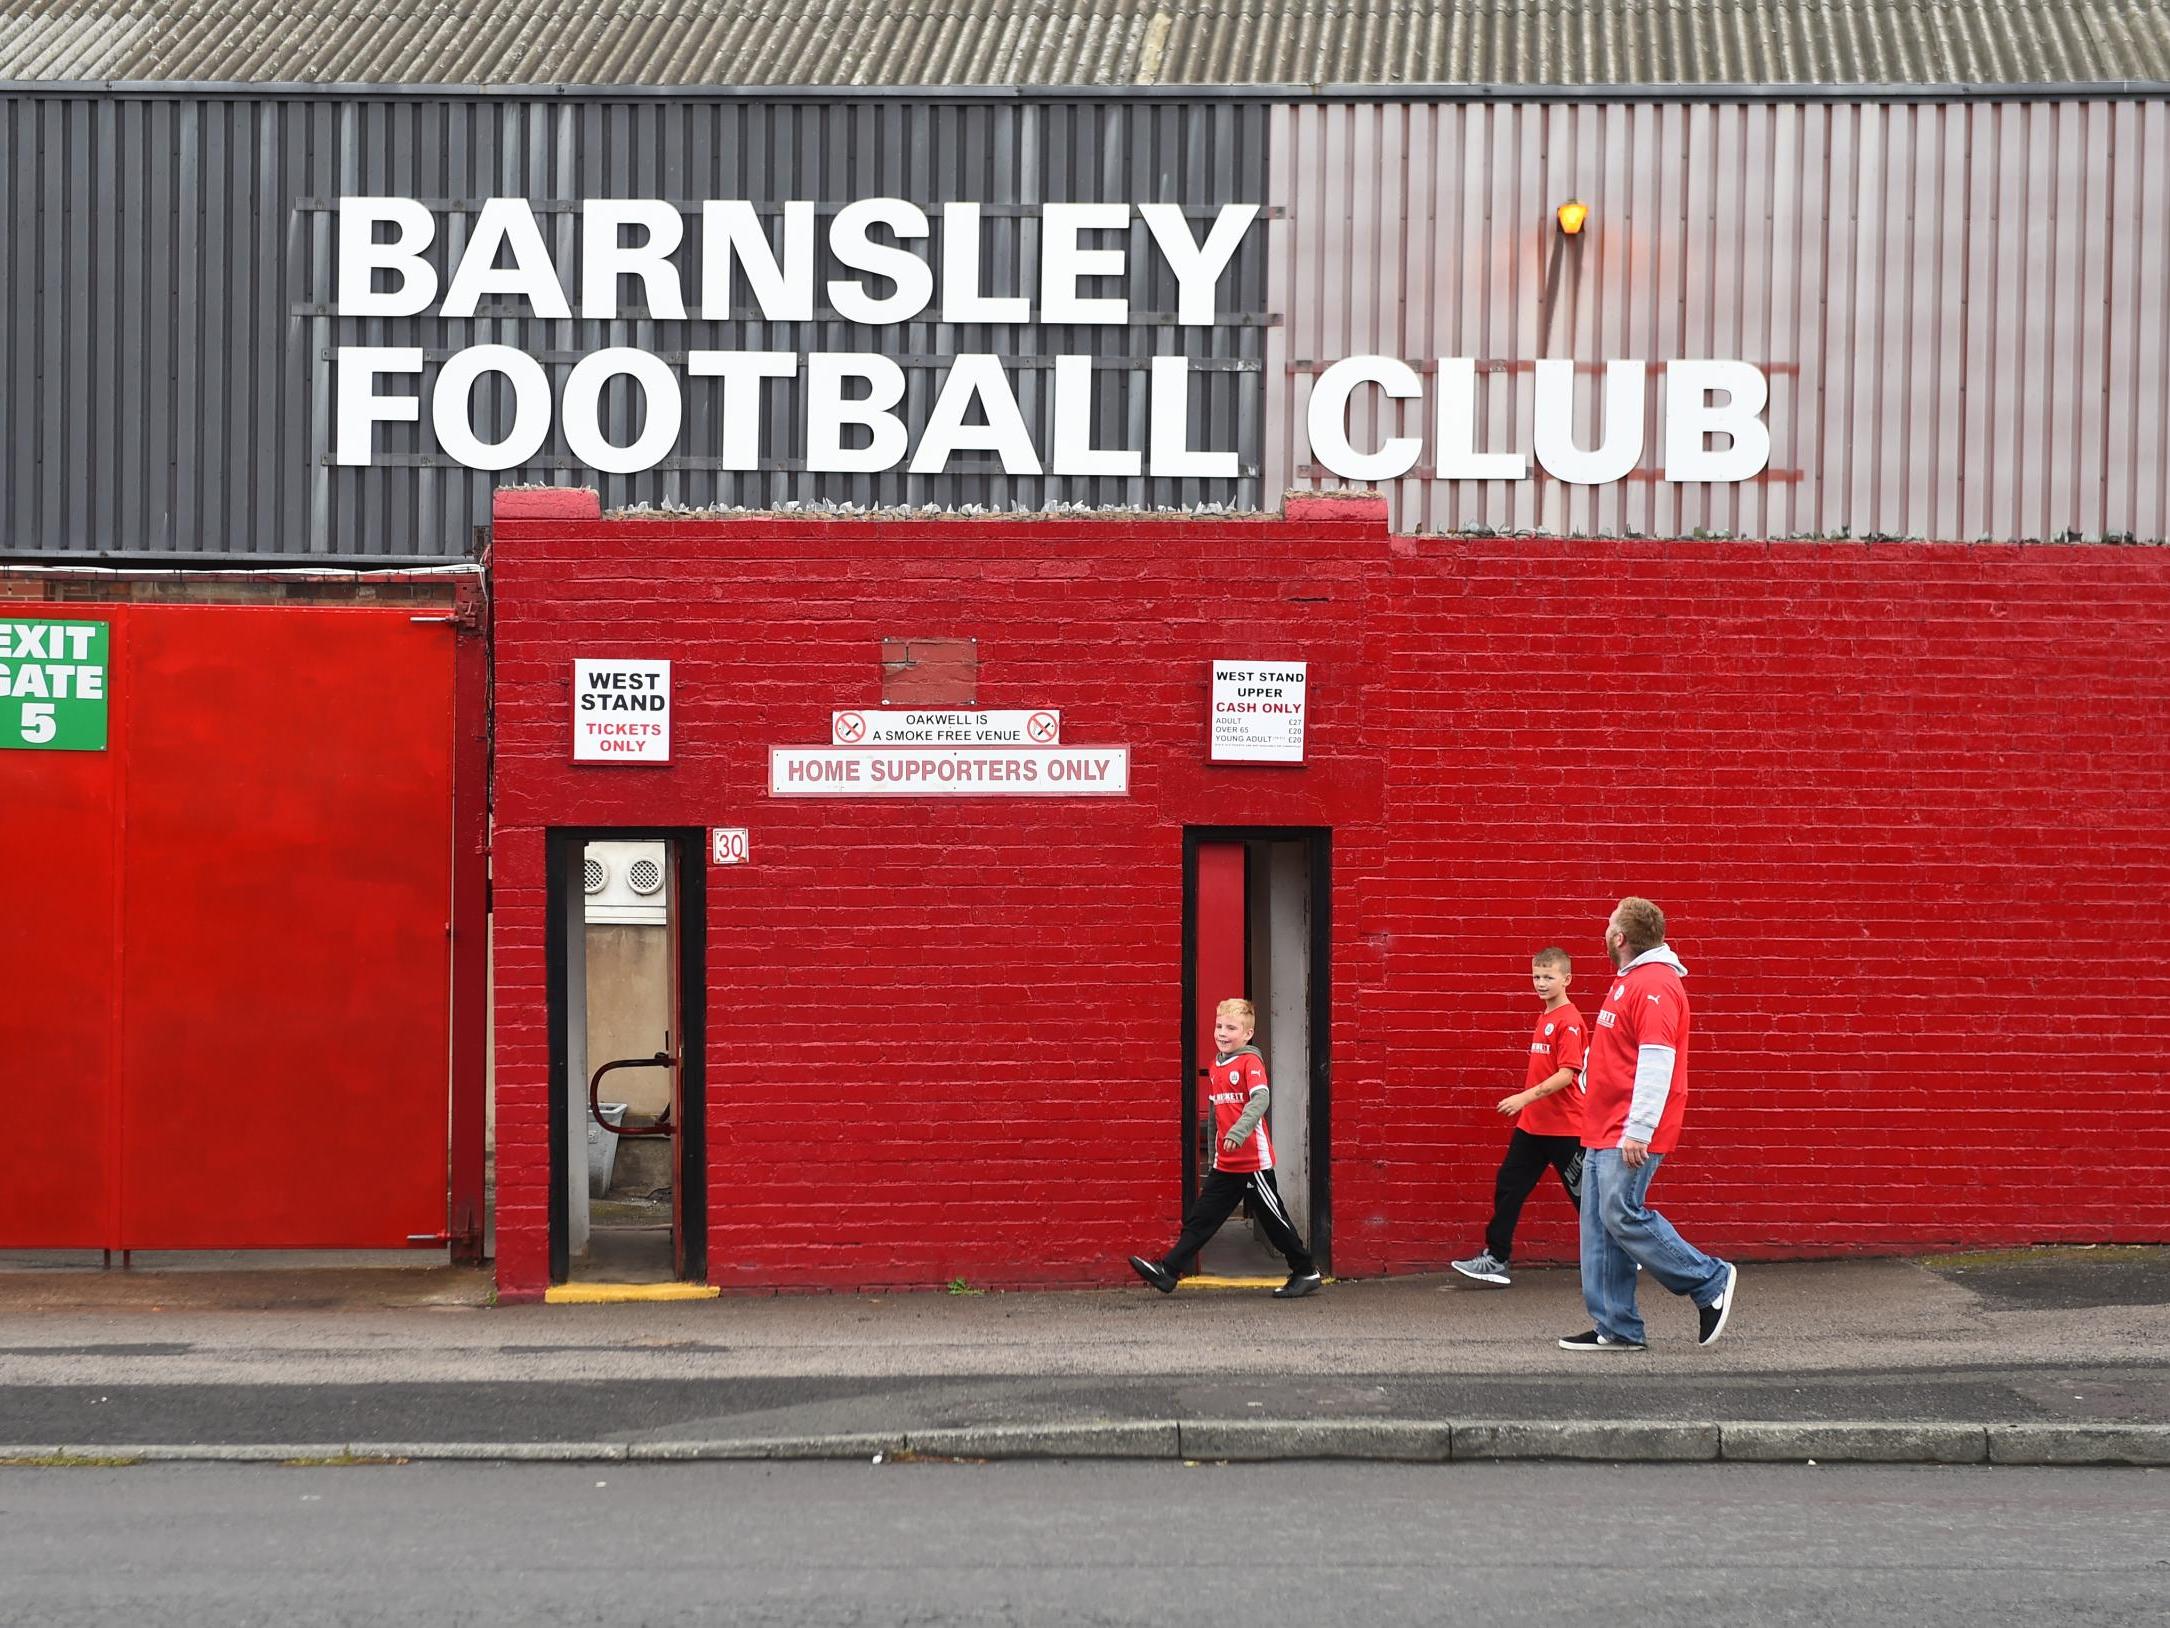 Police are investigating an incident from last weekend at Barnsley